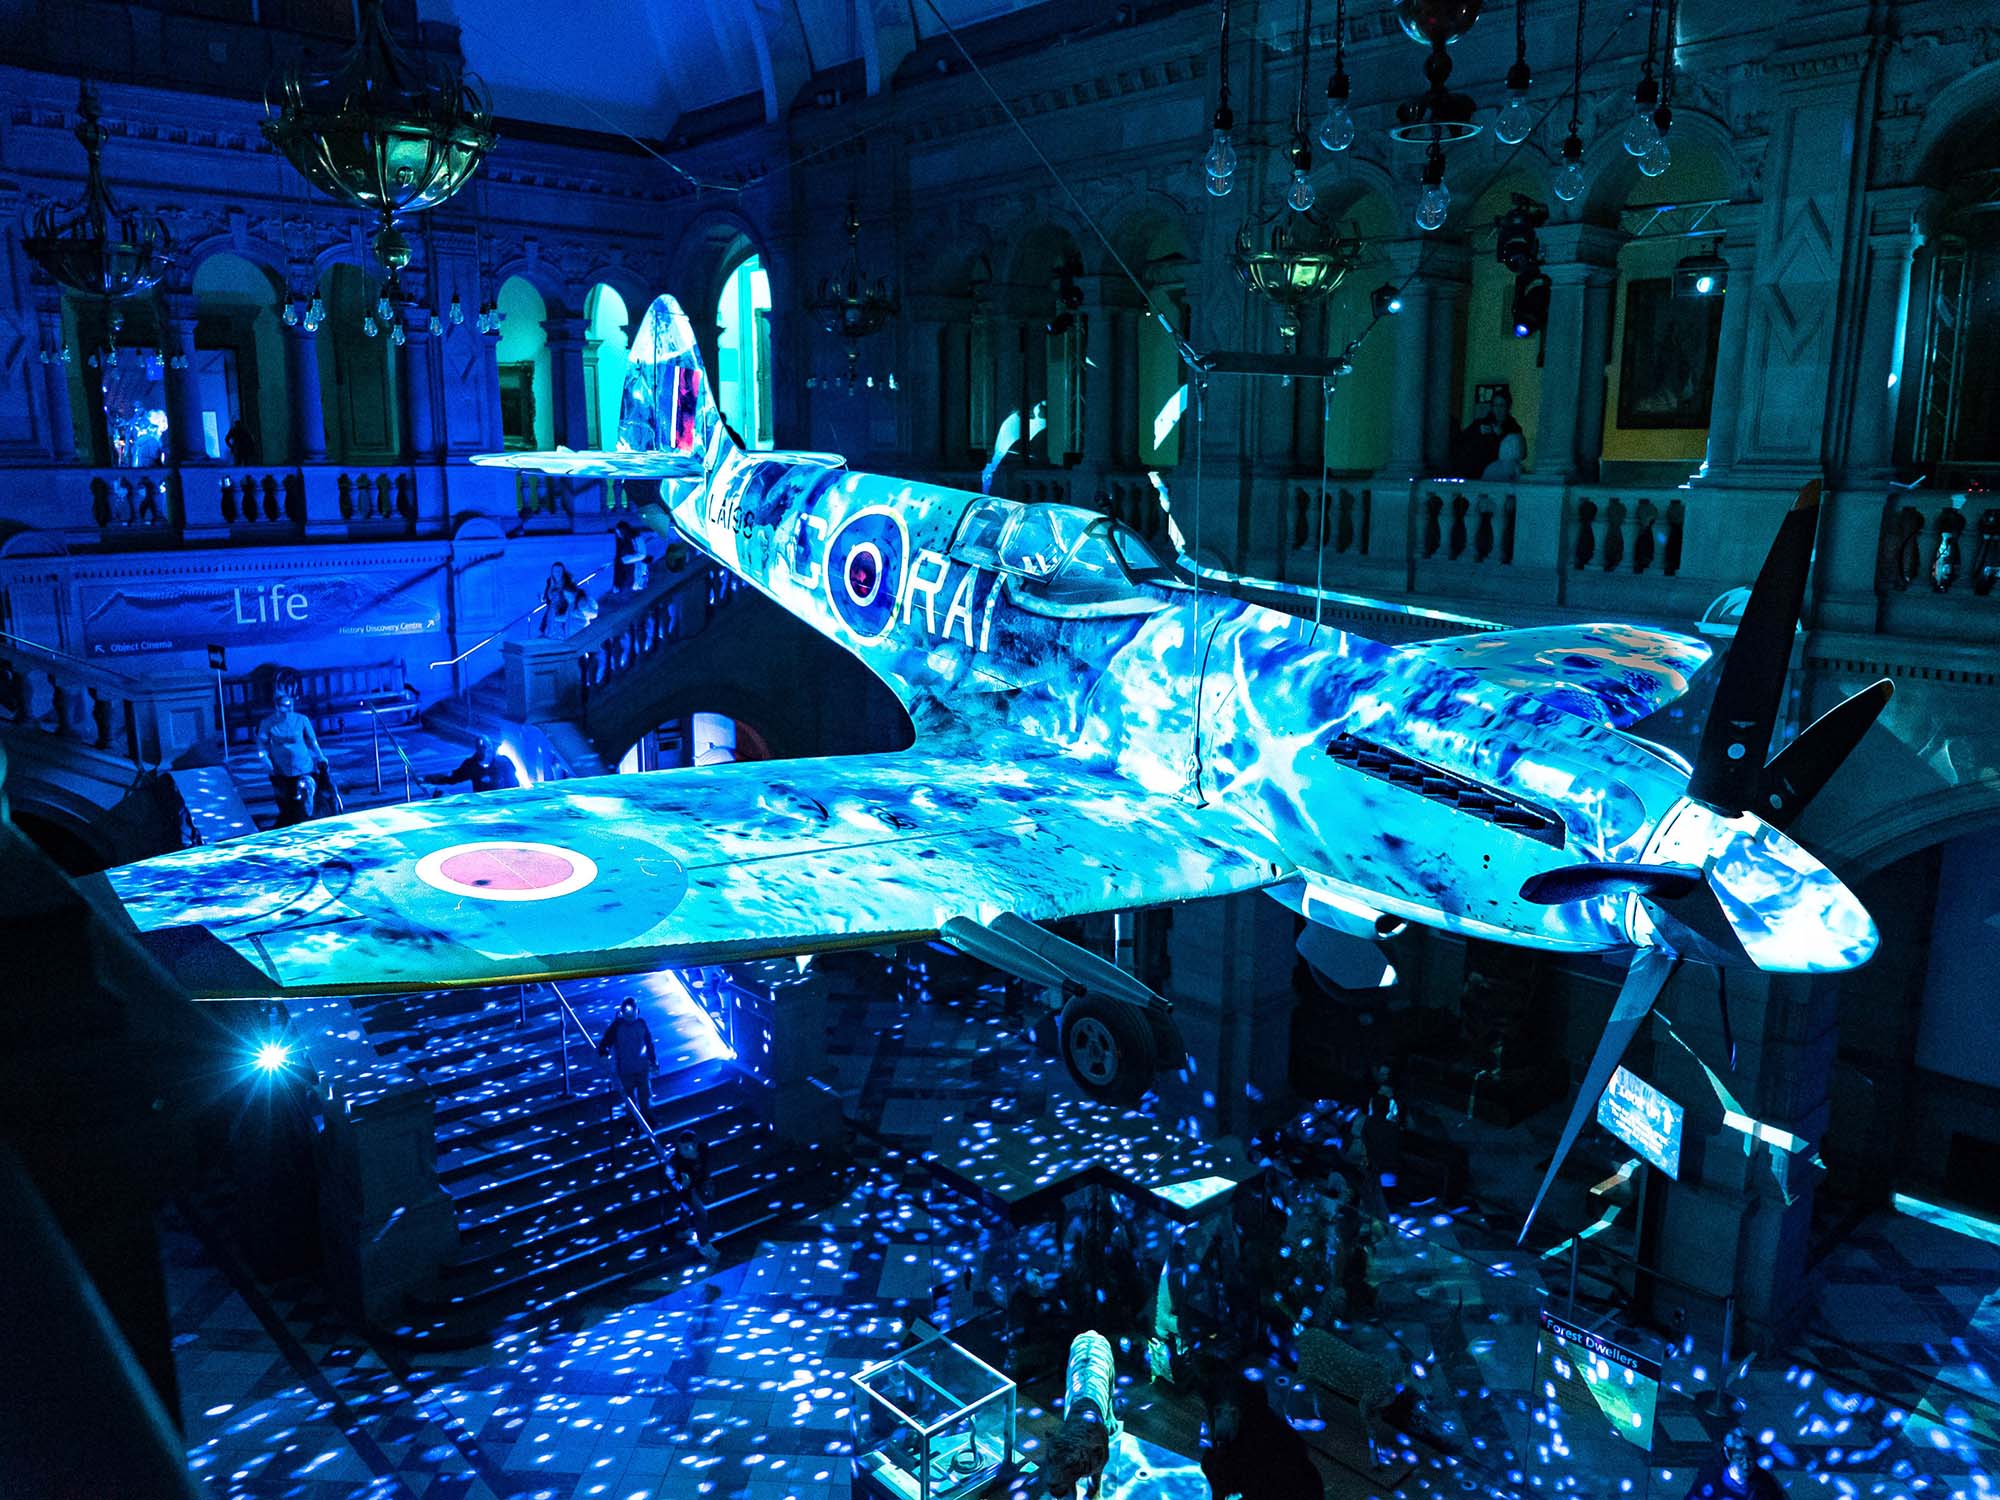 Spitfire Ice Christmas Projections at Kelvin Grove Art Museum Glasgow